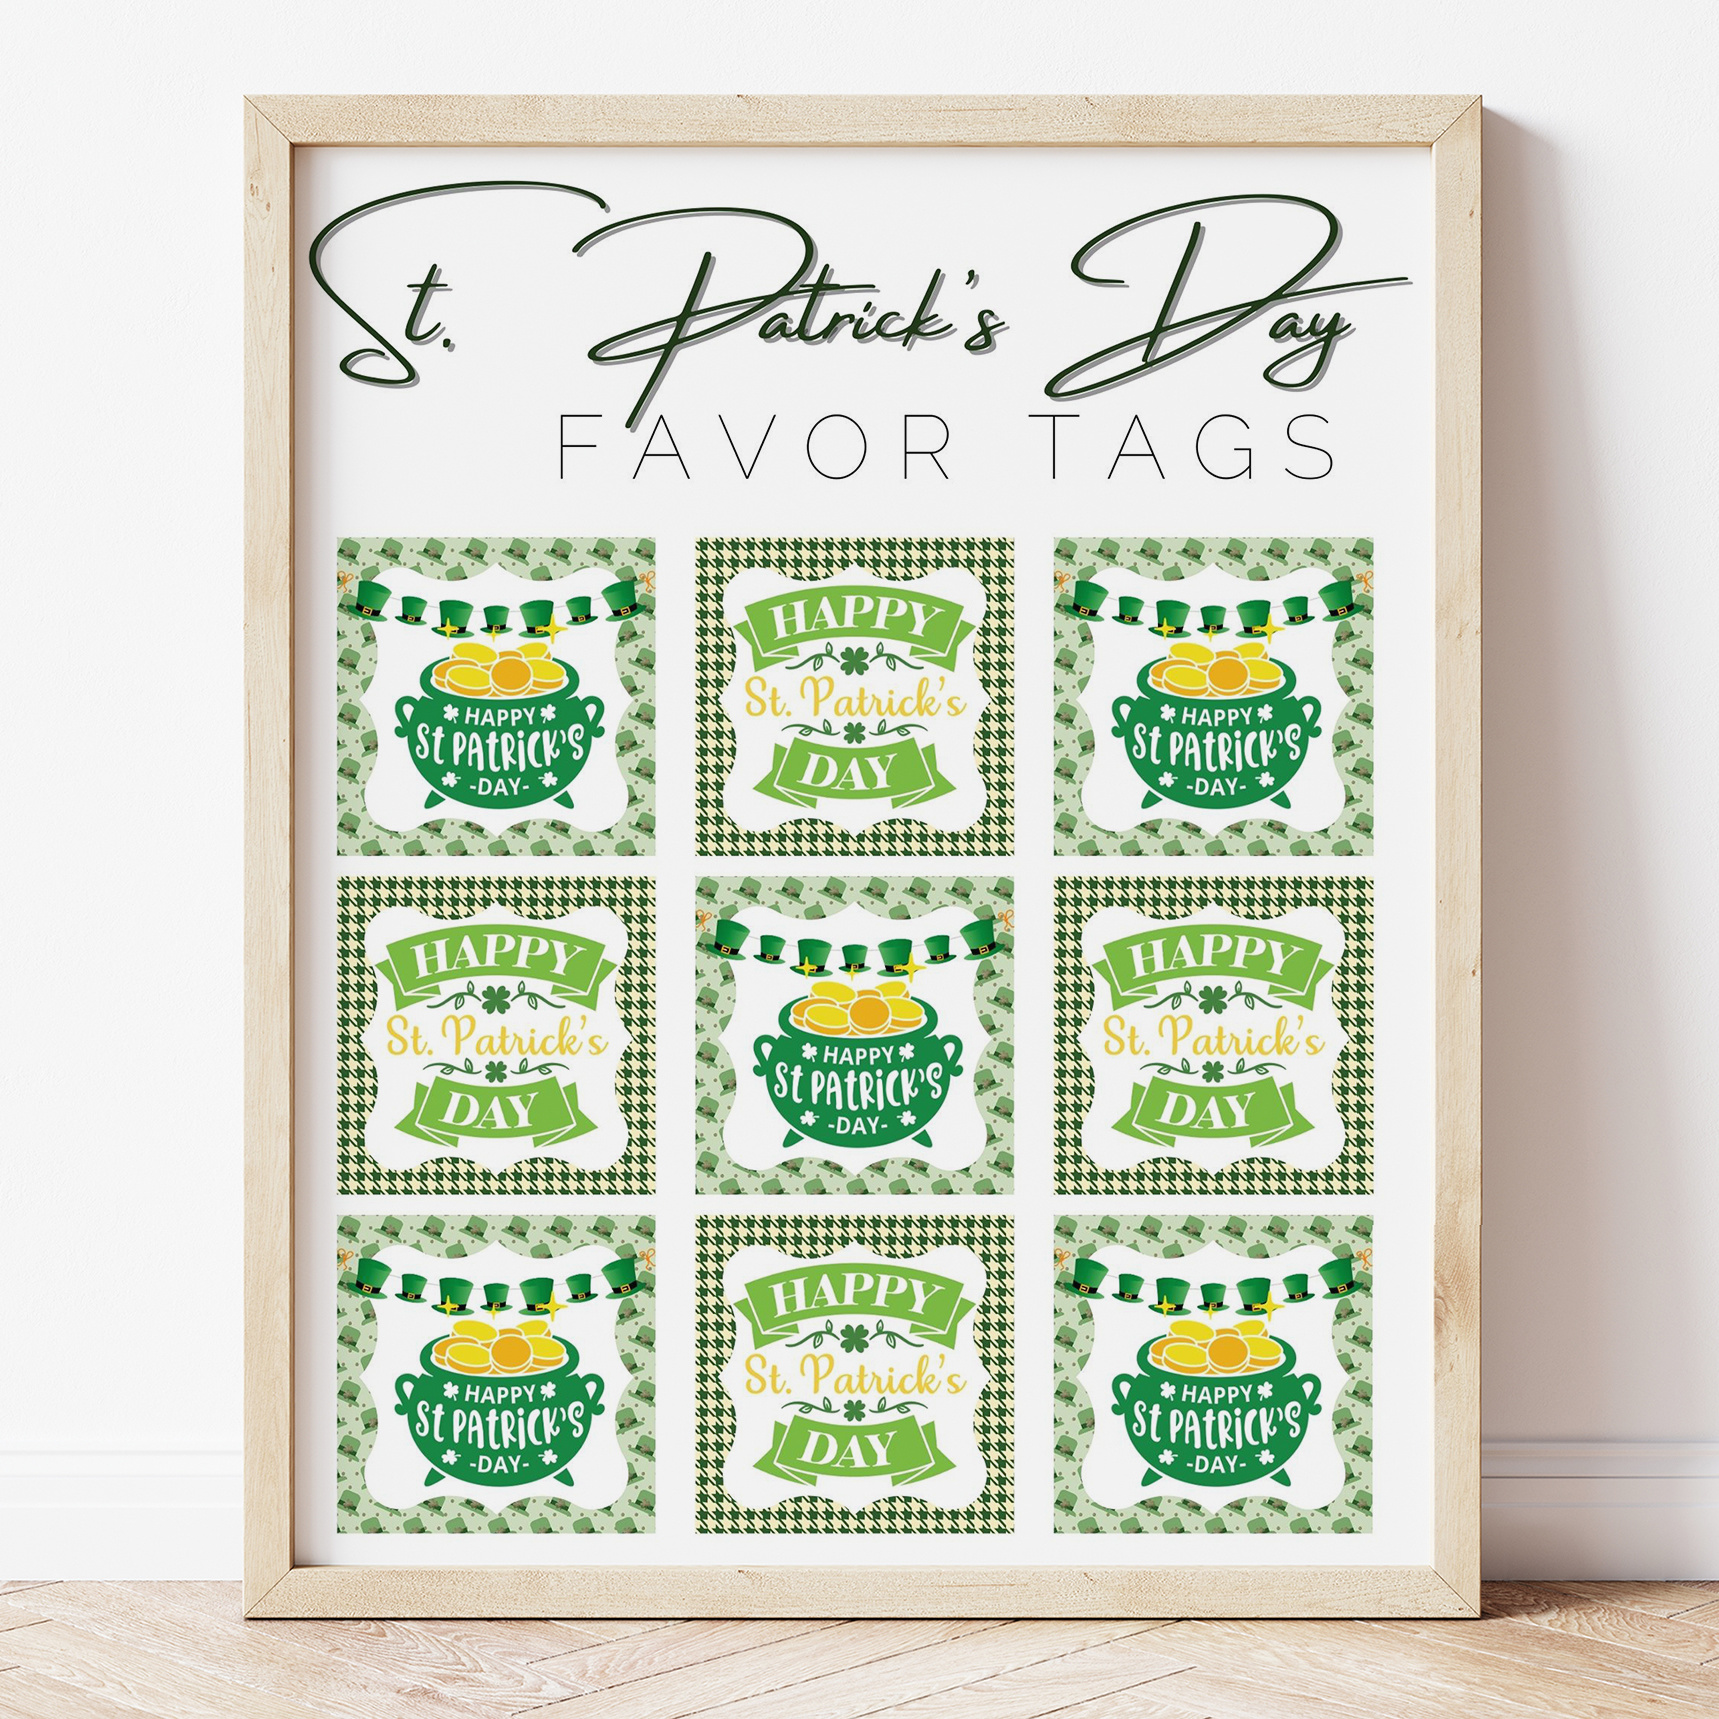 Free Printable St. Patrick’s Day Tags